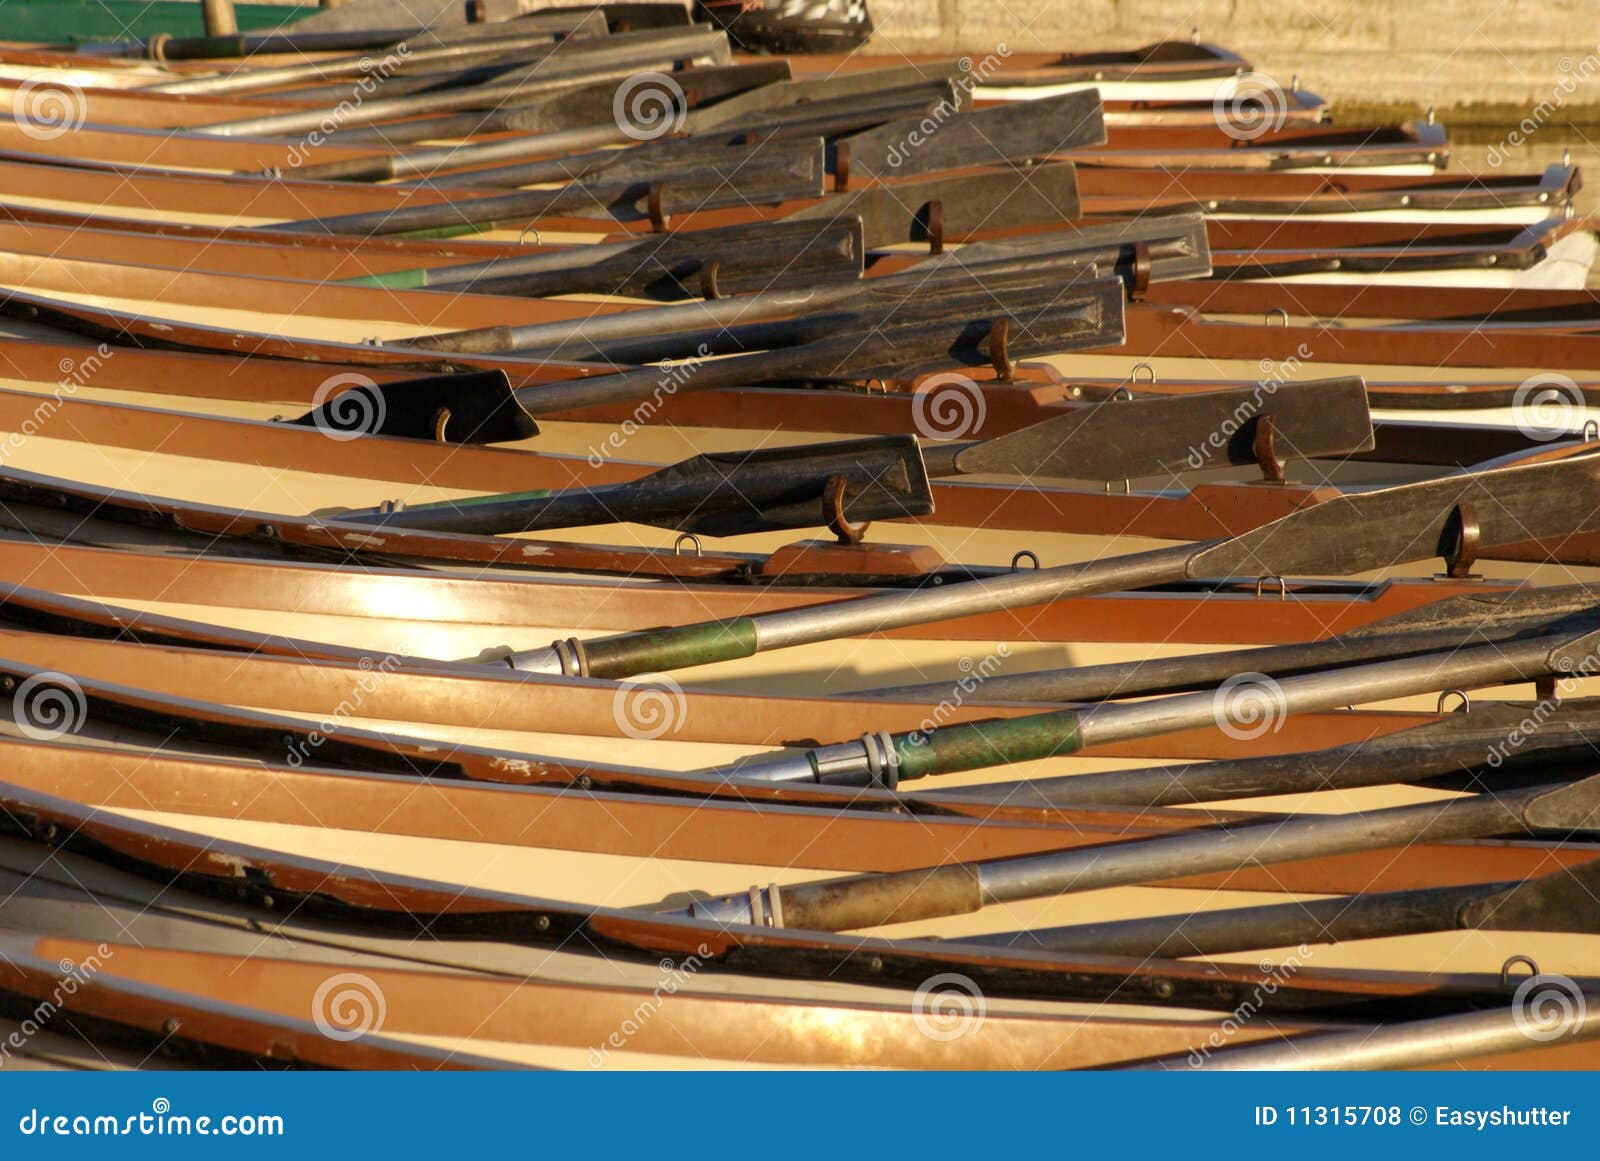 Rowing boats and oars